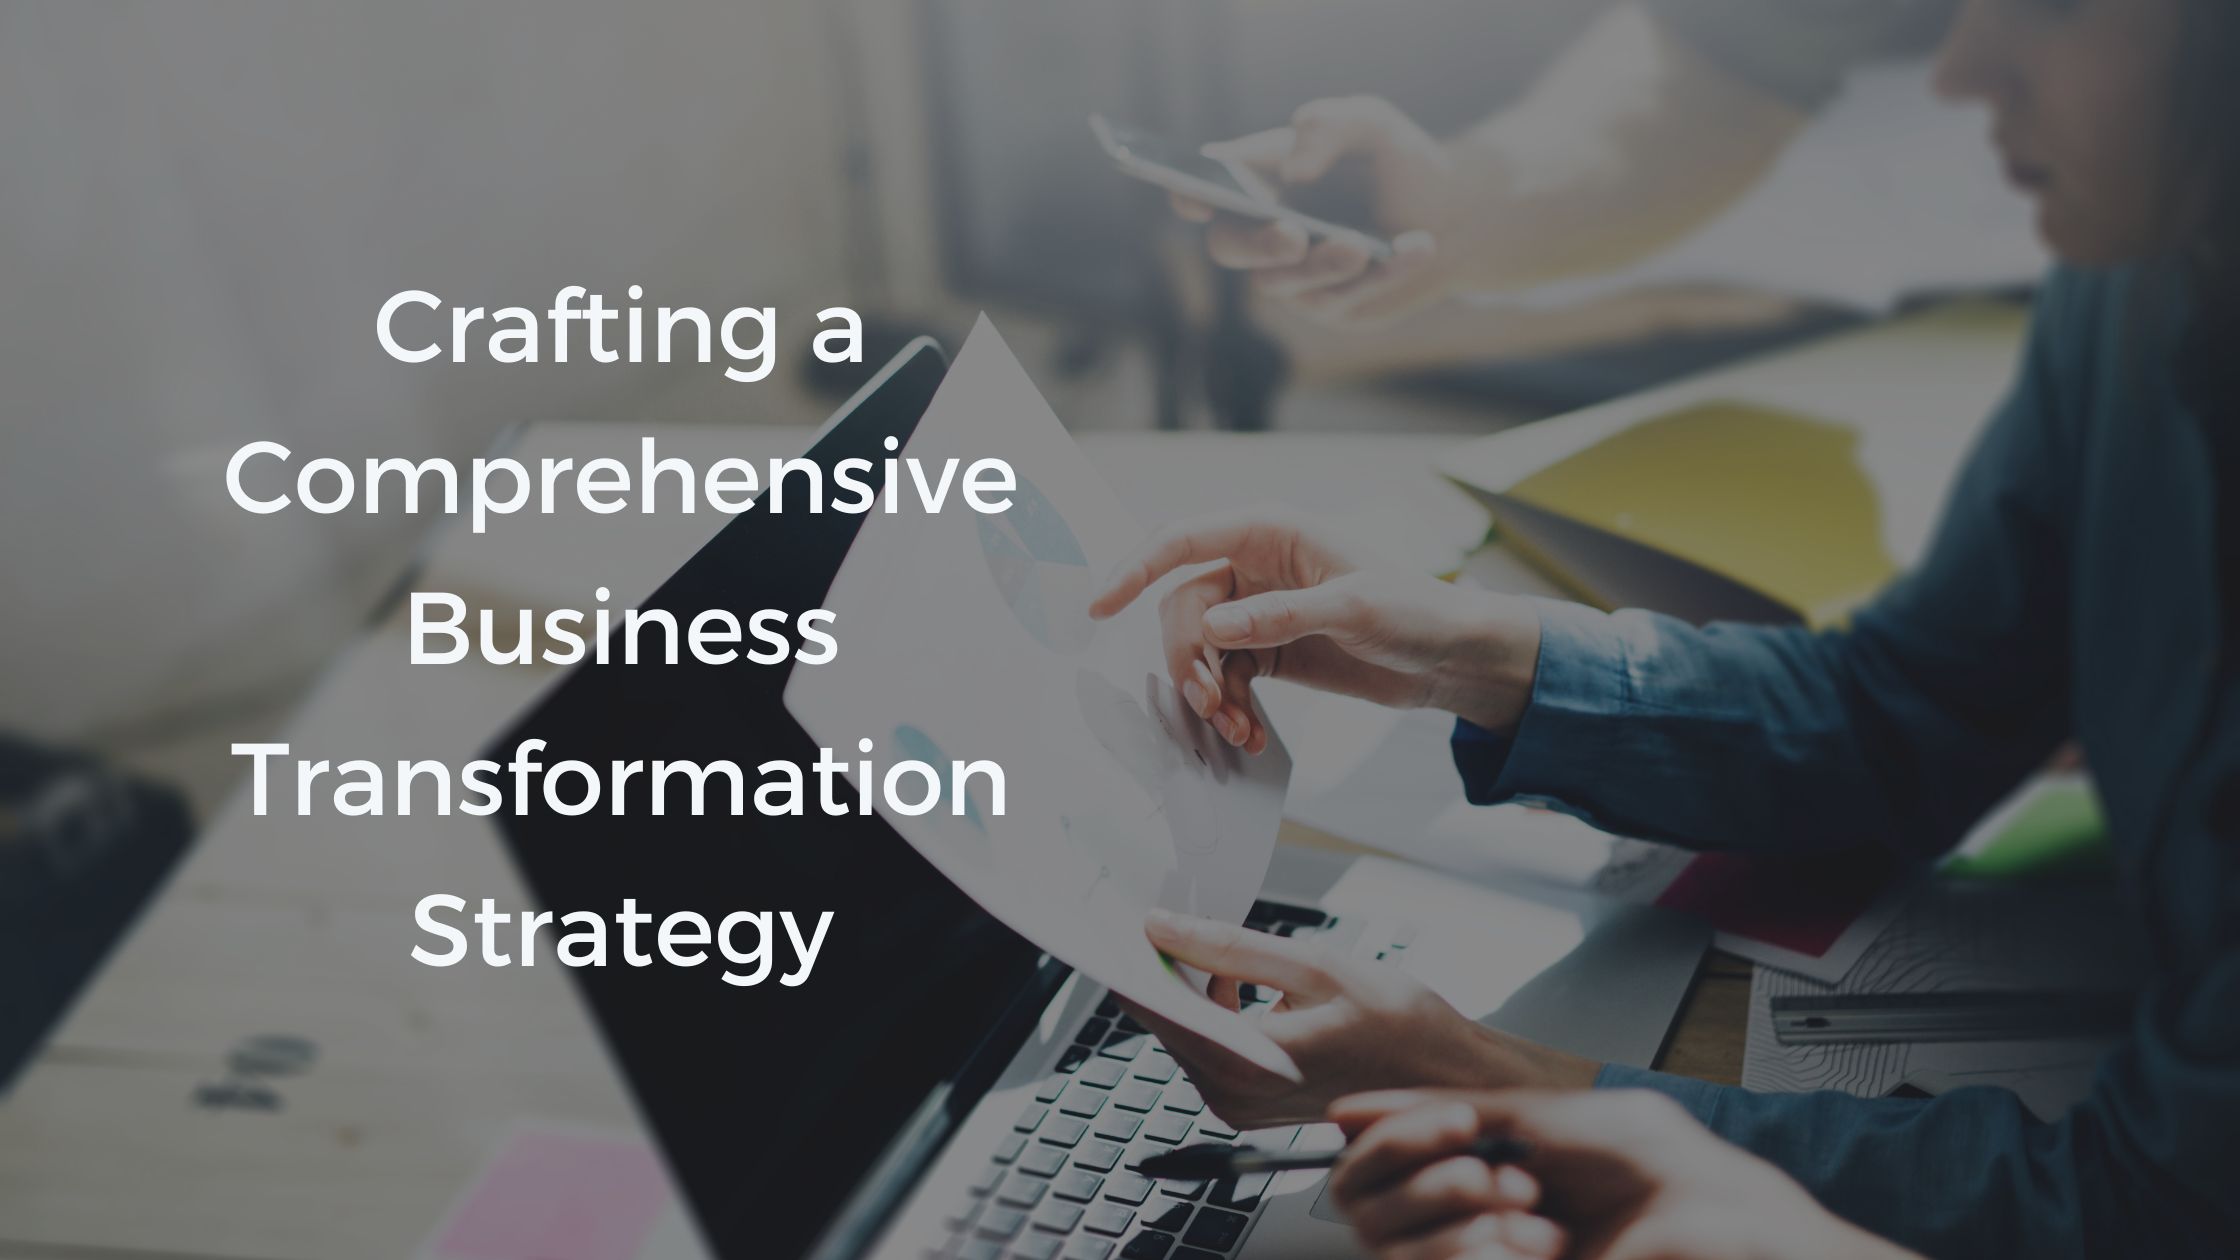 Crafting a Comprehensive Business Transformation Strategy